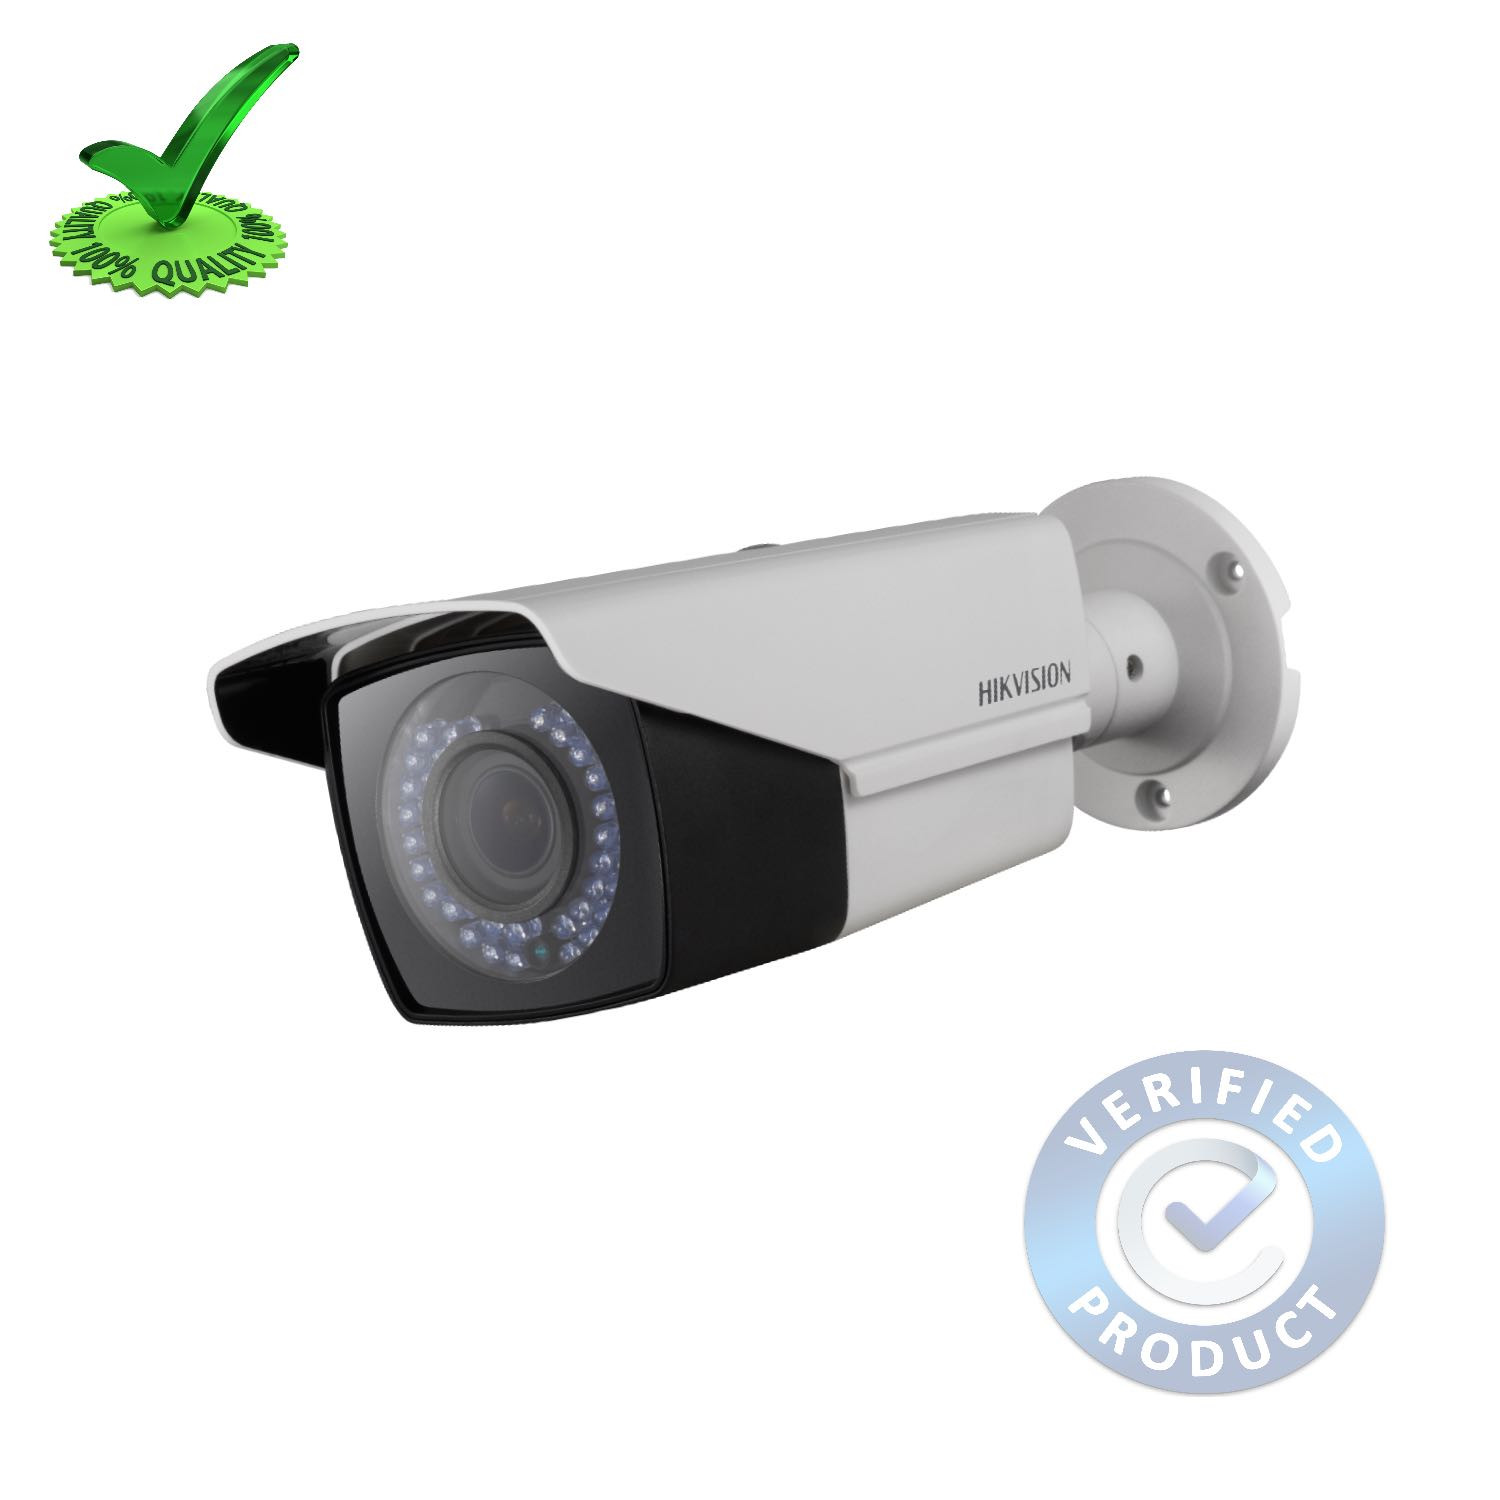 Hikvision DS-2CE1AC0T-VFIR3F 1MP HD Bullet Camera